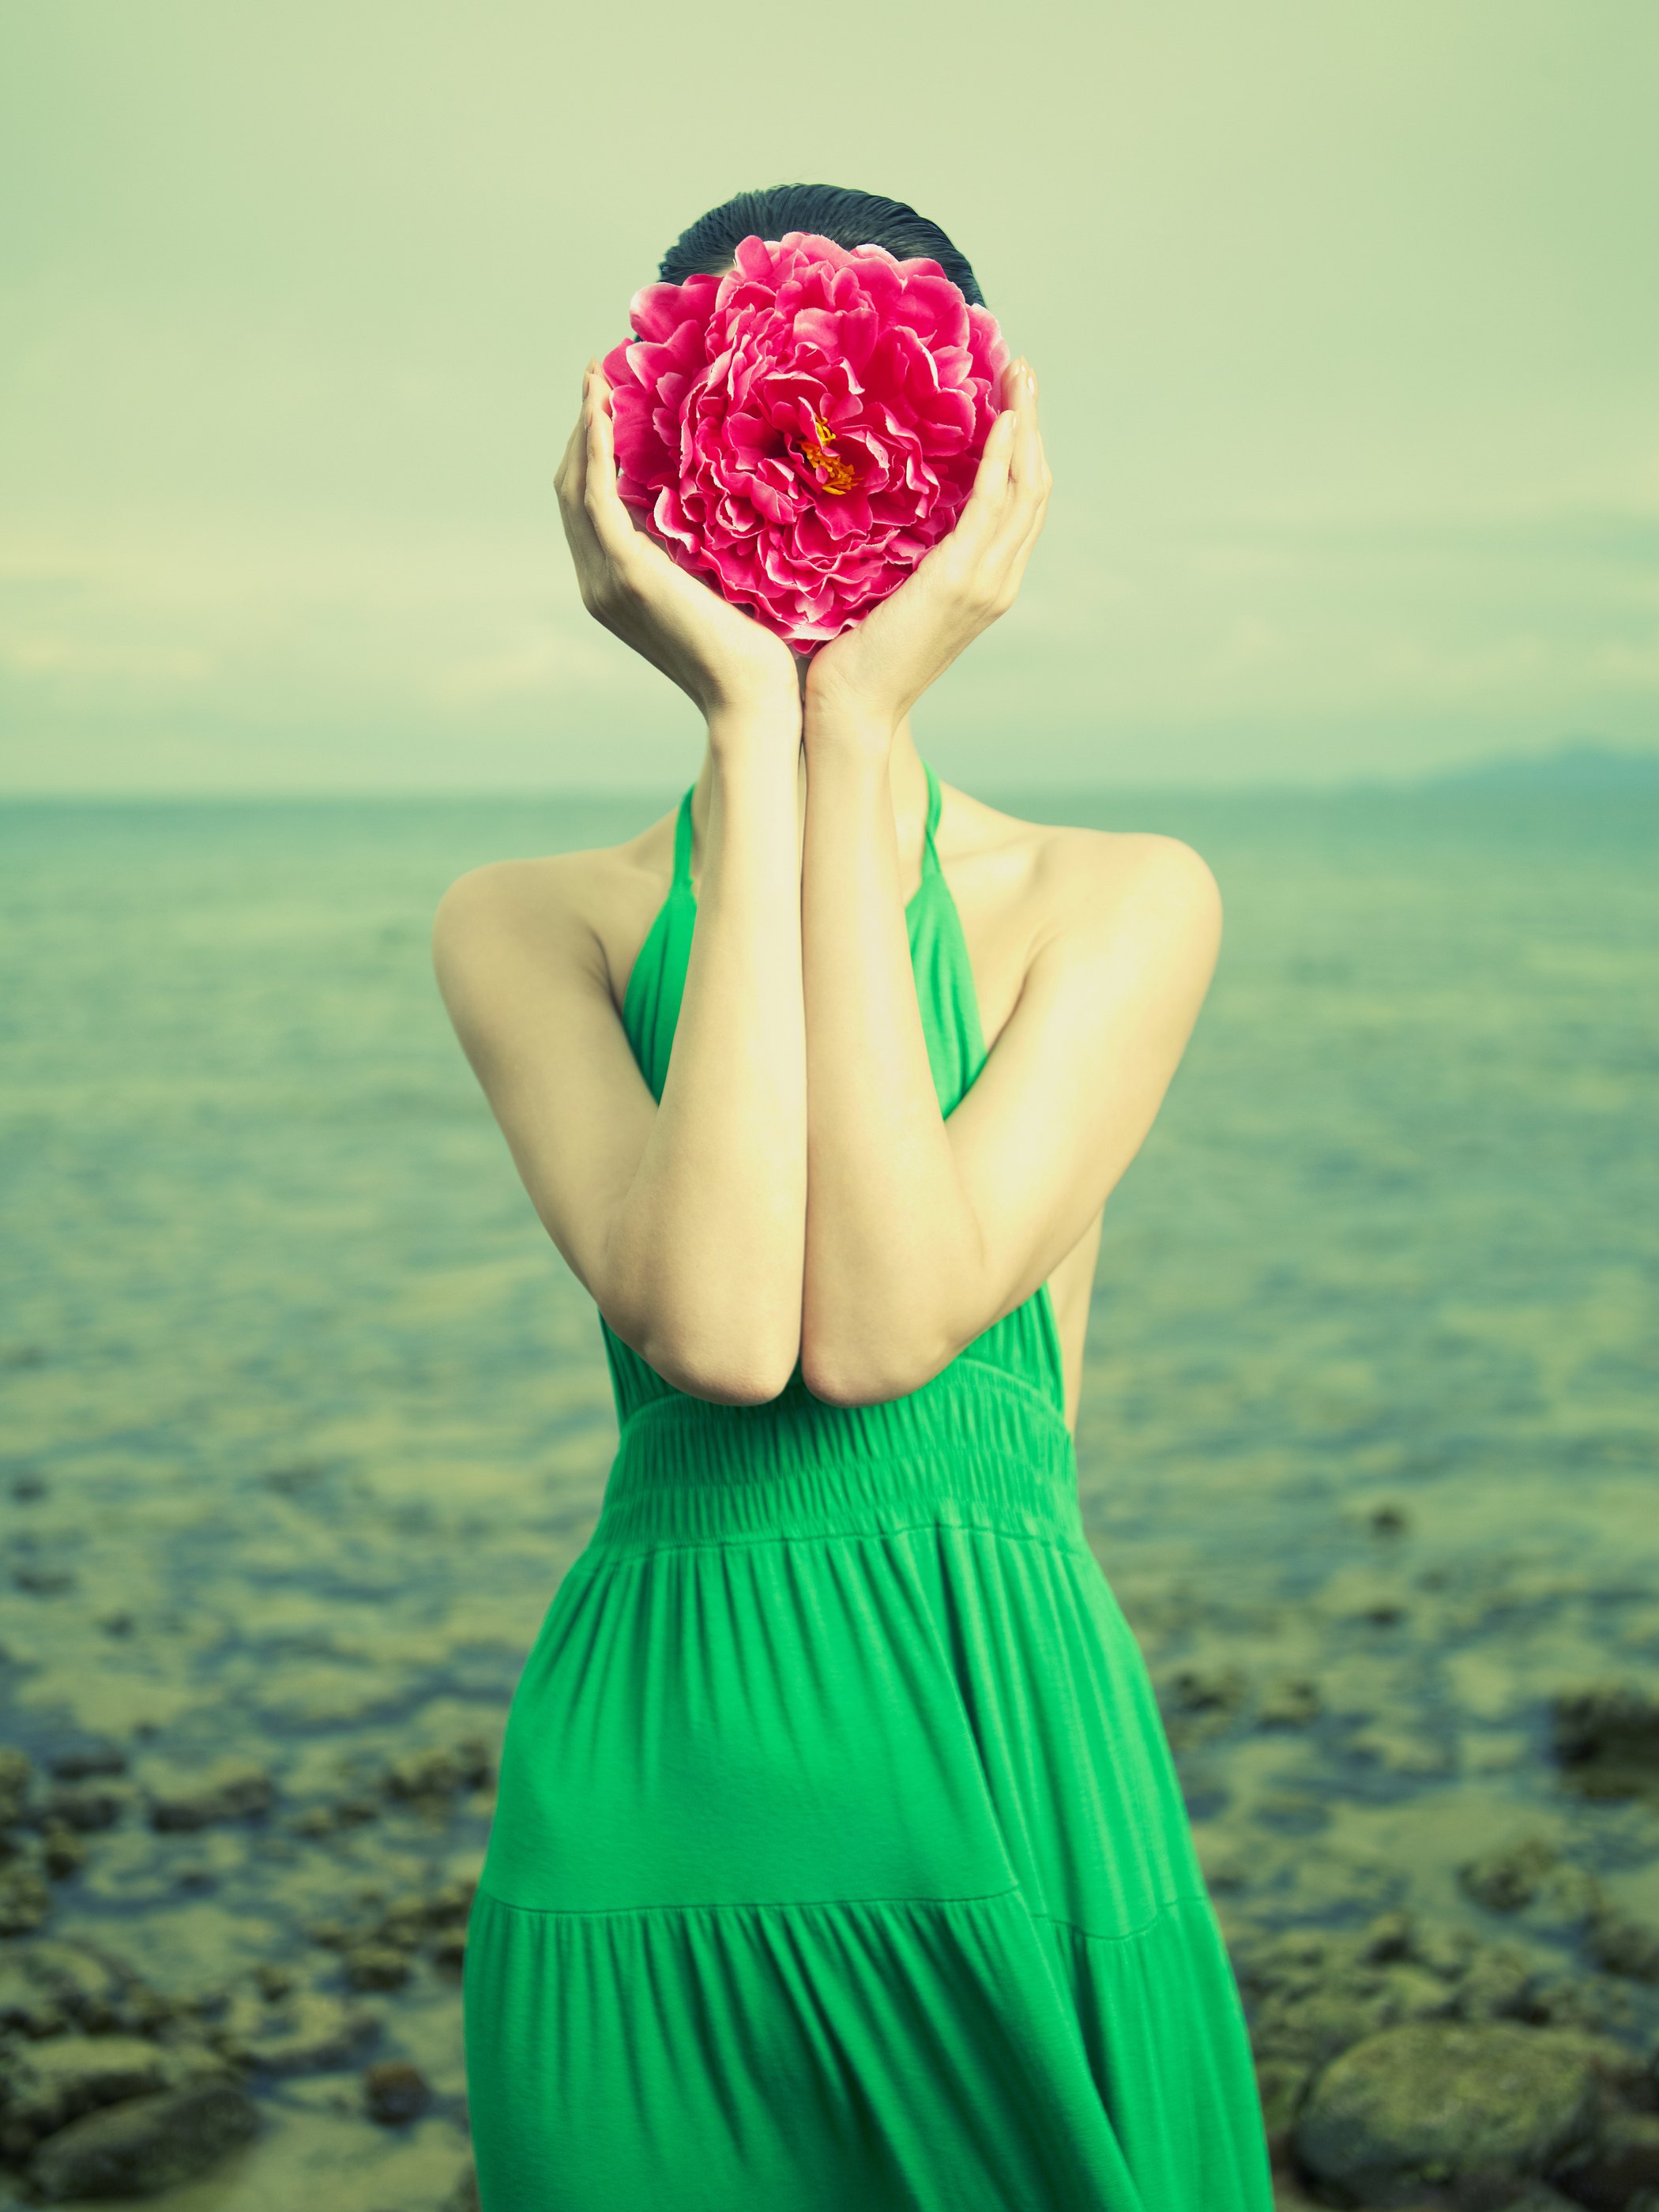 Surreal portrait of a woman with a flower instead of a face